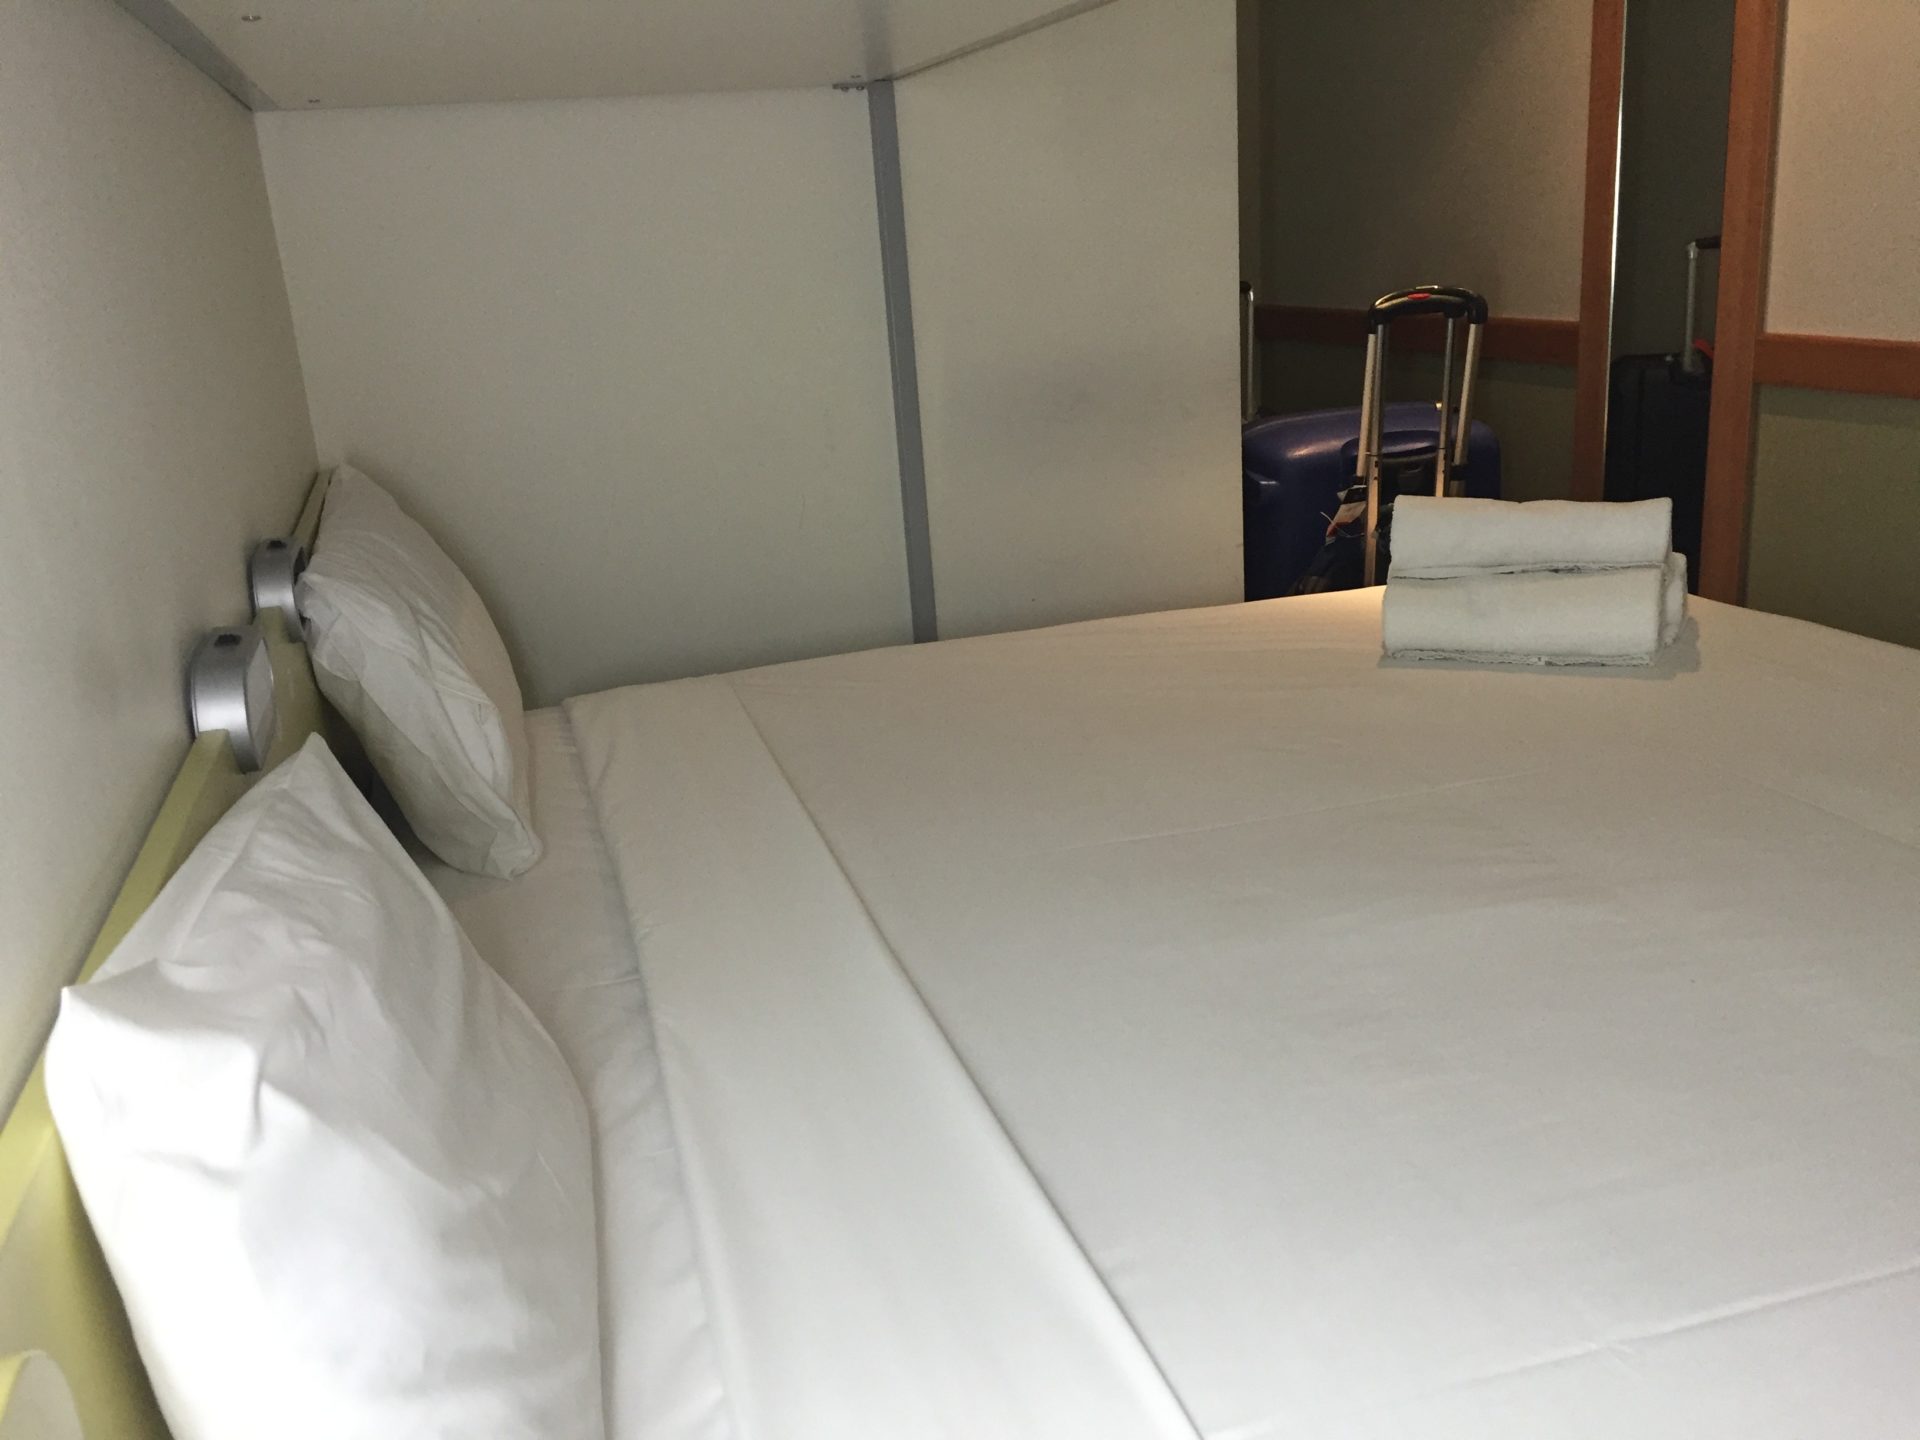 a bed with white sheets and a suitcase